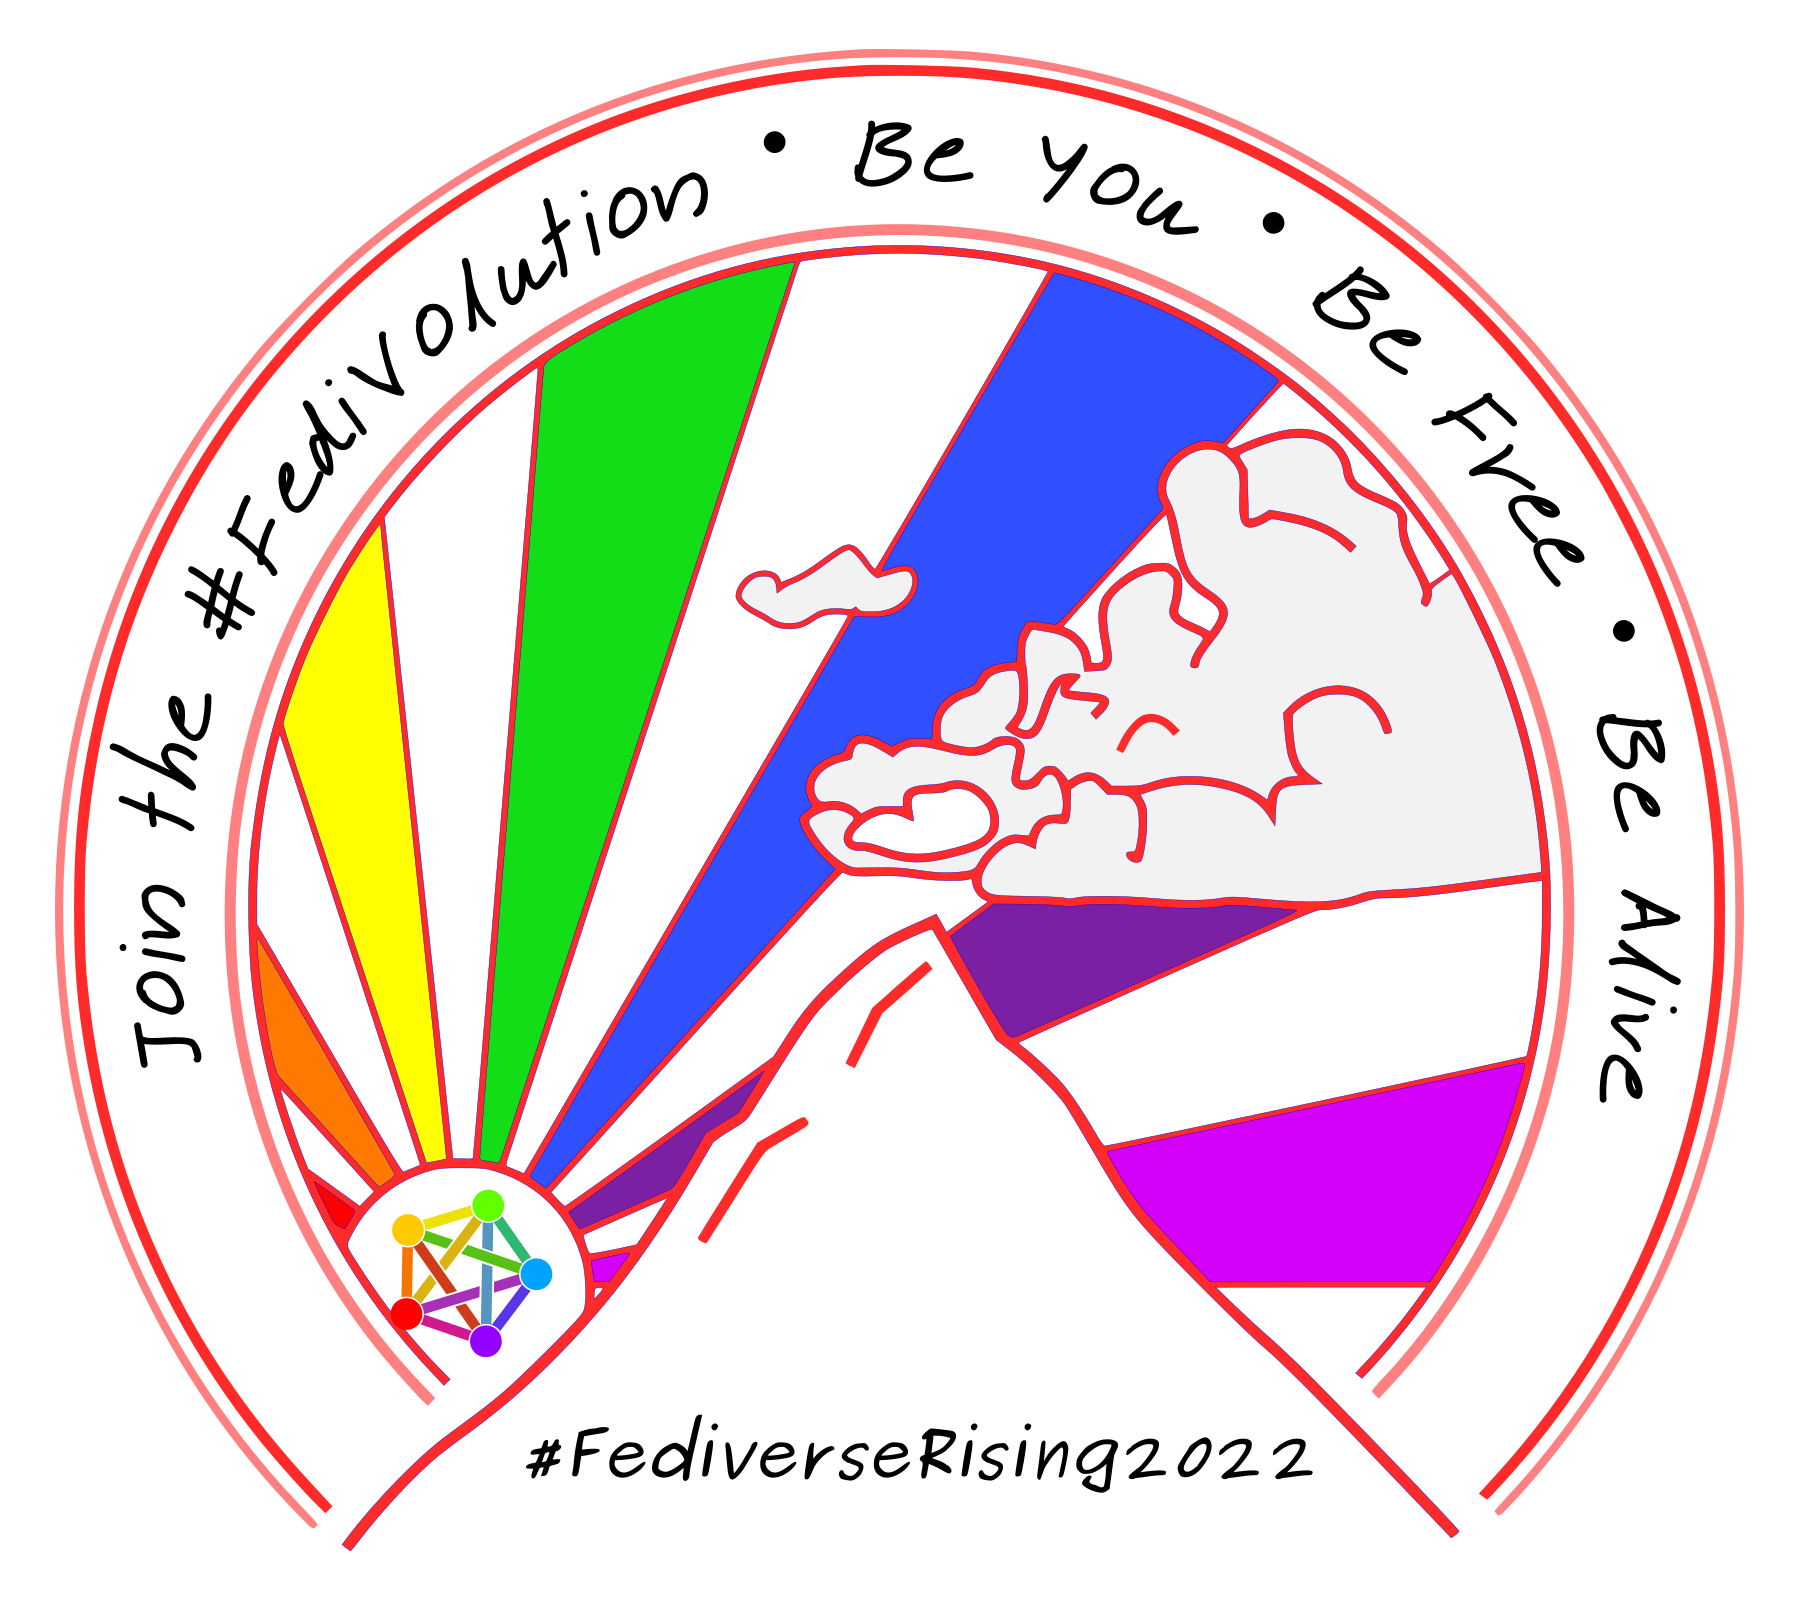 #FediverseRising2022, Join the #Fedivolution, Be You, Be Free, Be Alive (Rainbow version)